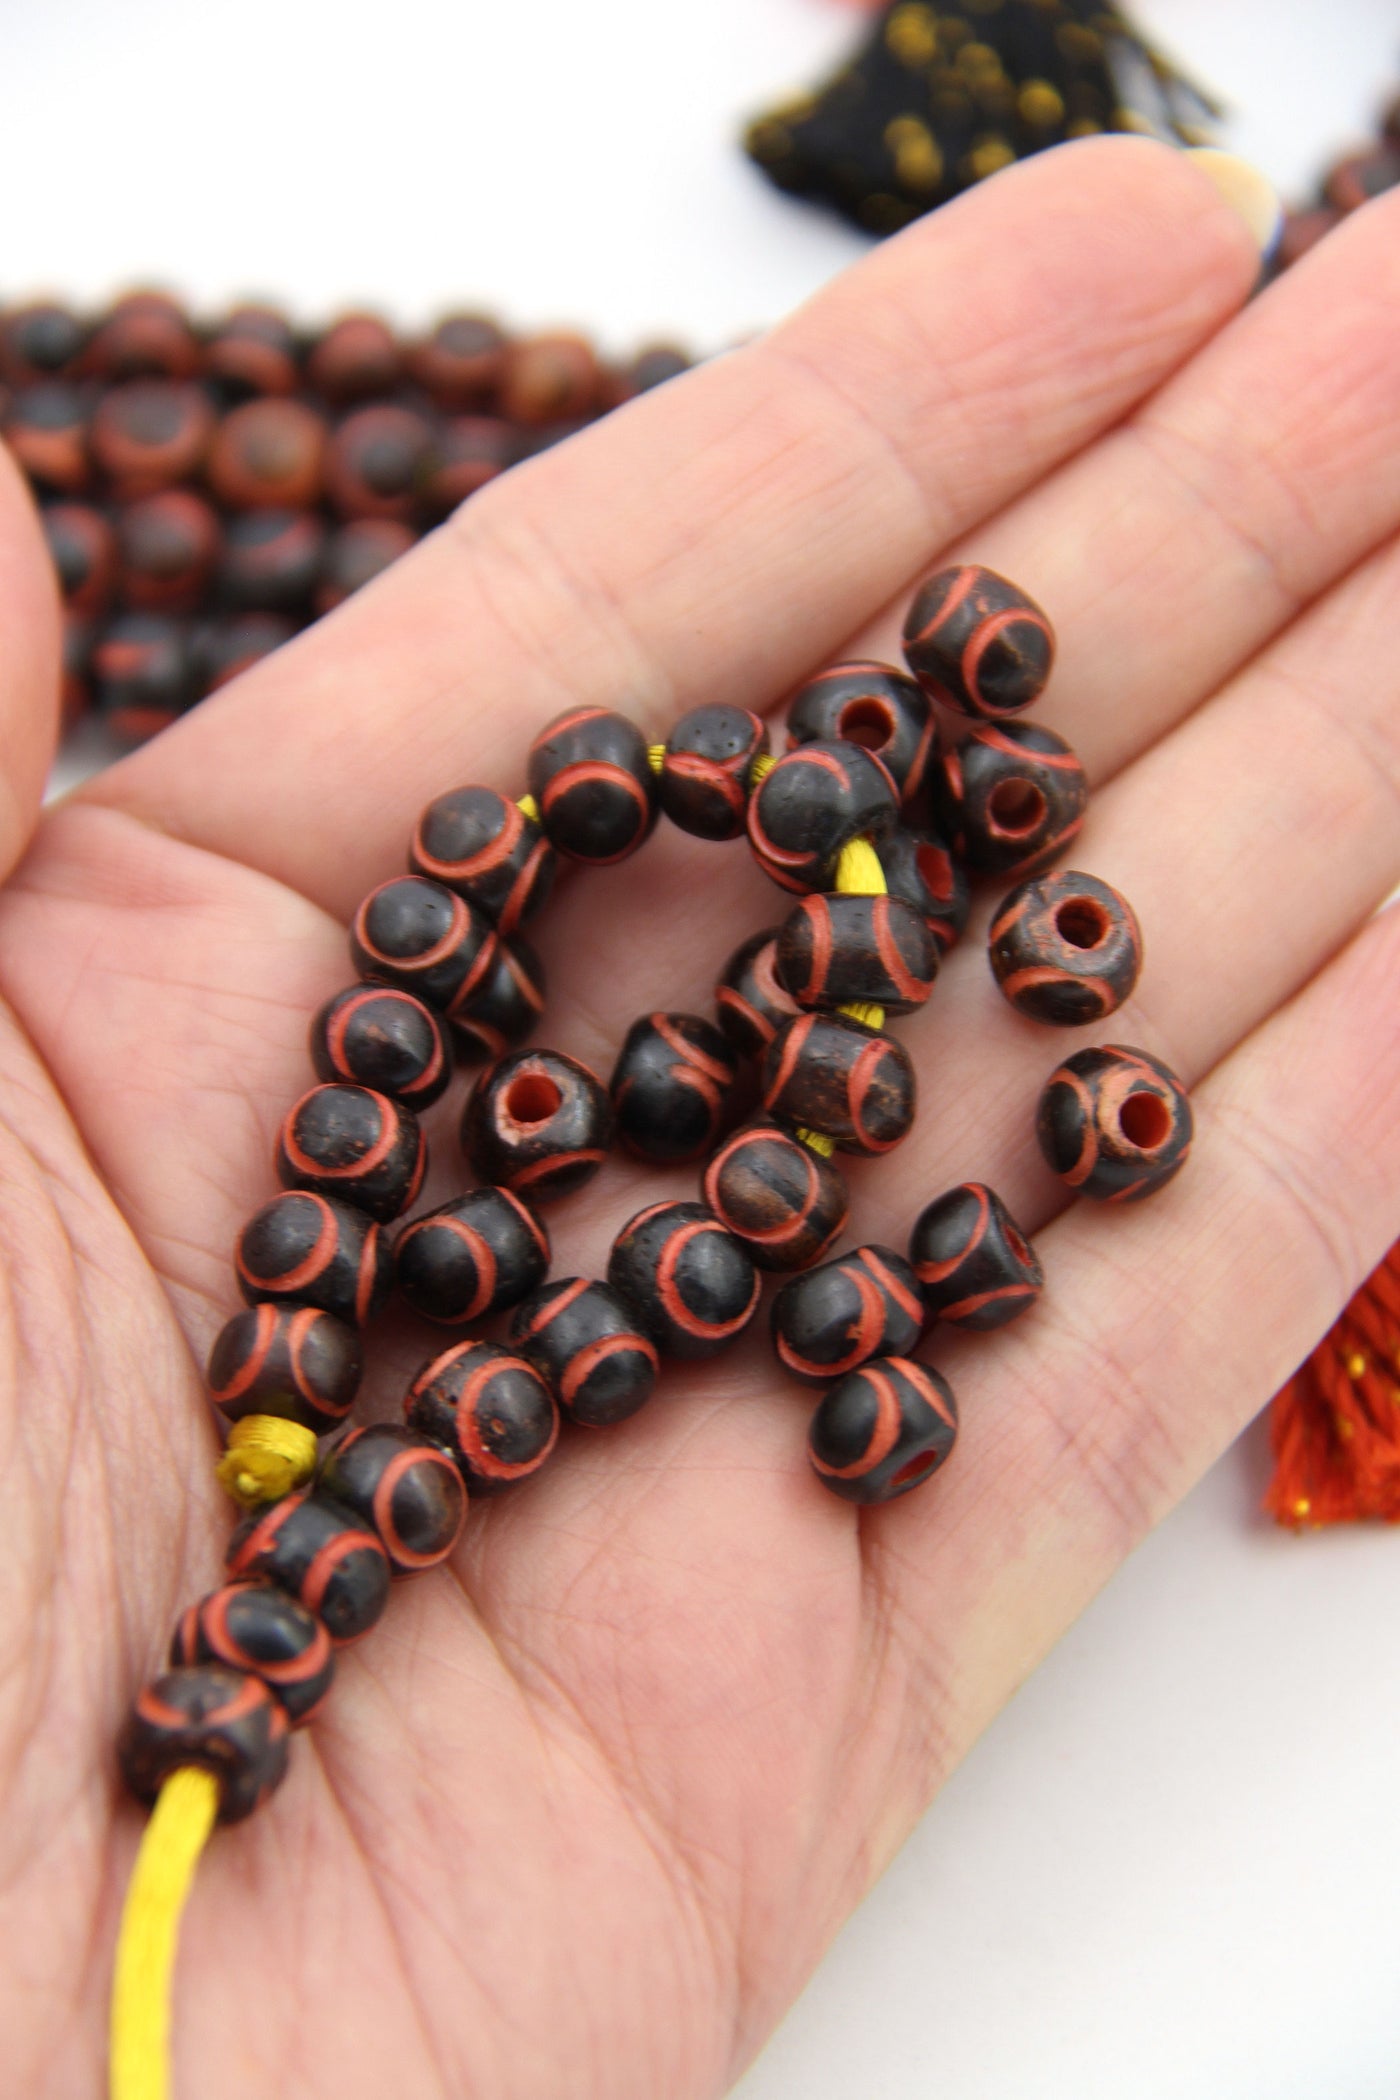 Orange & Black Carved Bone Beads, 10mm, for Halloween DIYs and Halloween Collection 